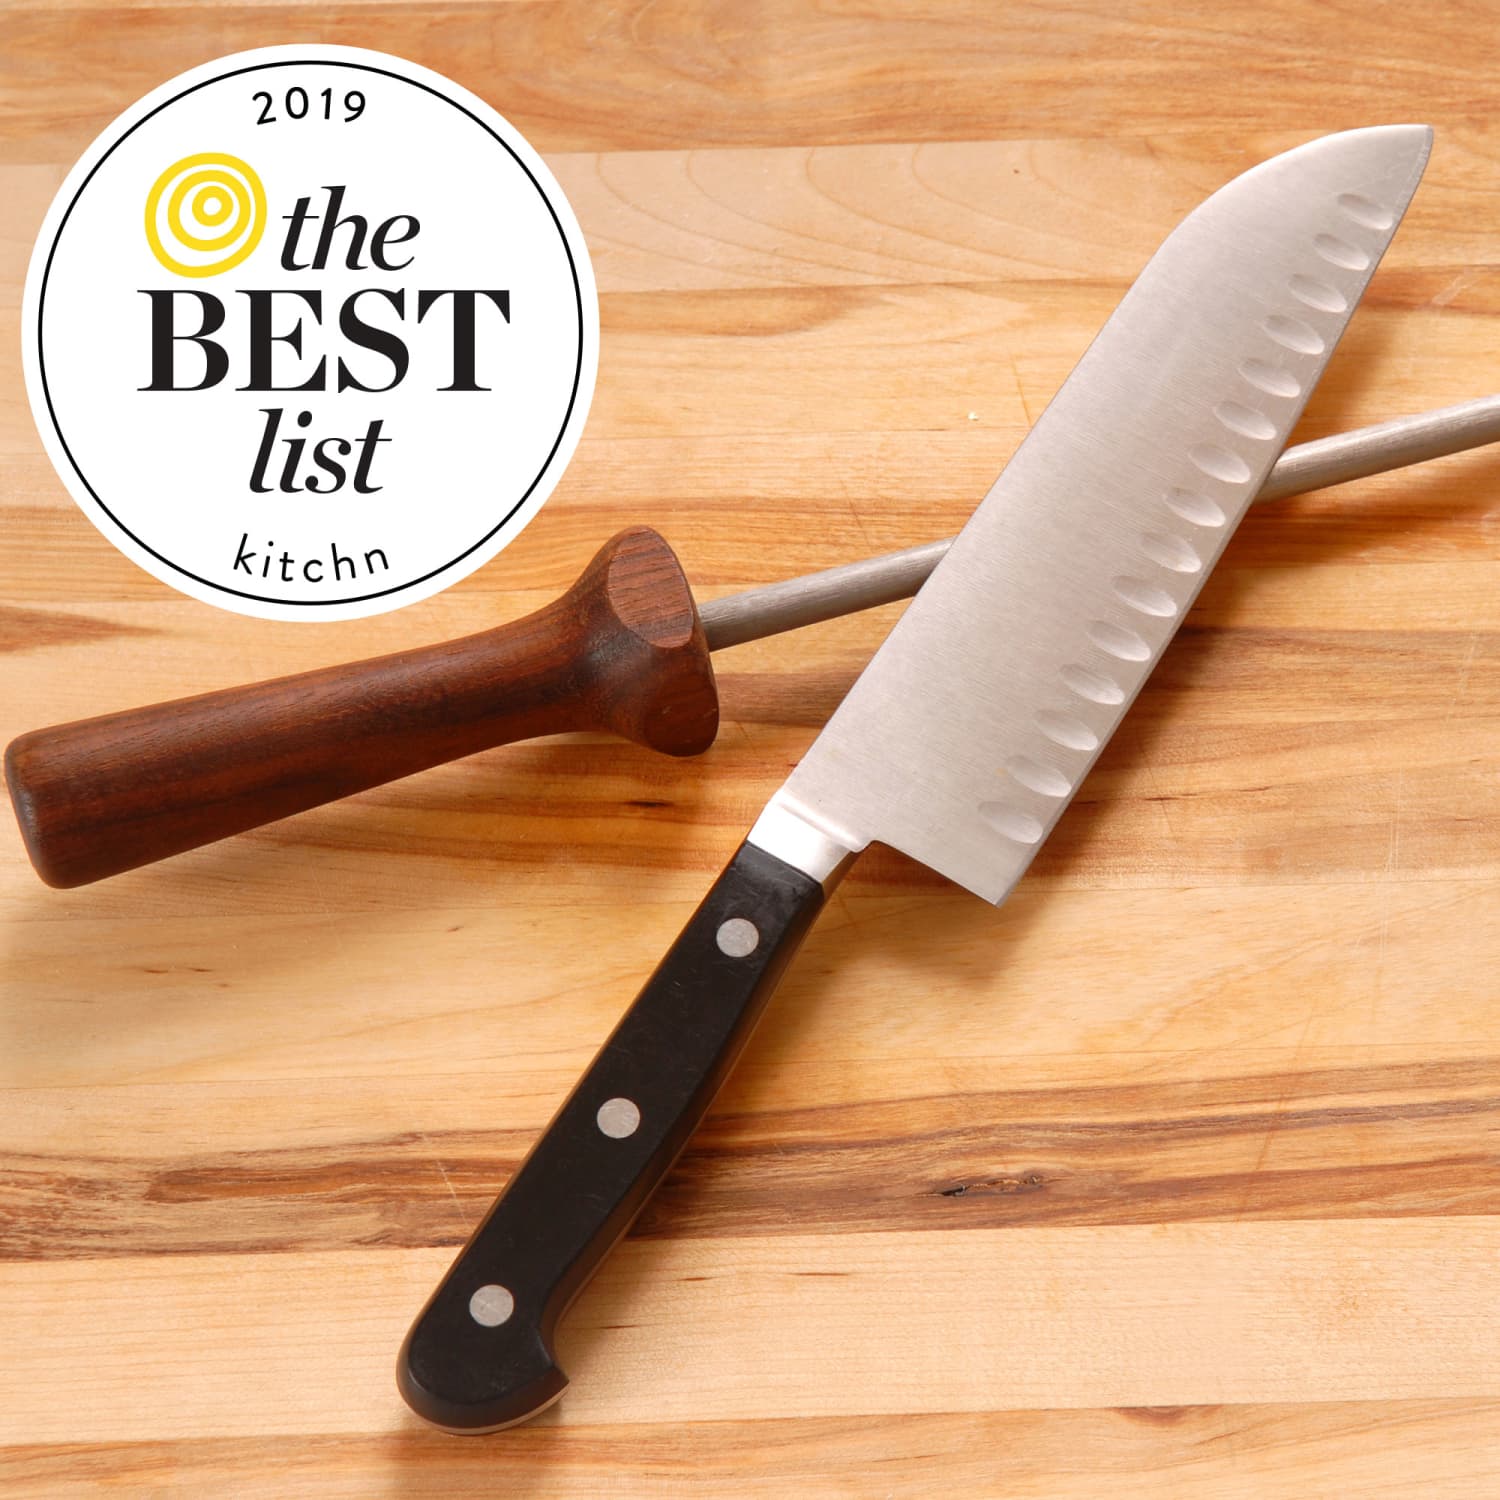 Why America's Test Kitchen Calls the Chef's Choice Trizor XV the Best Knife  Sharpener 